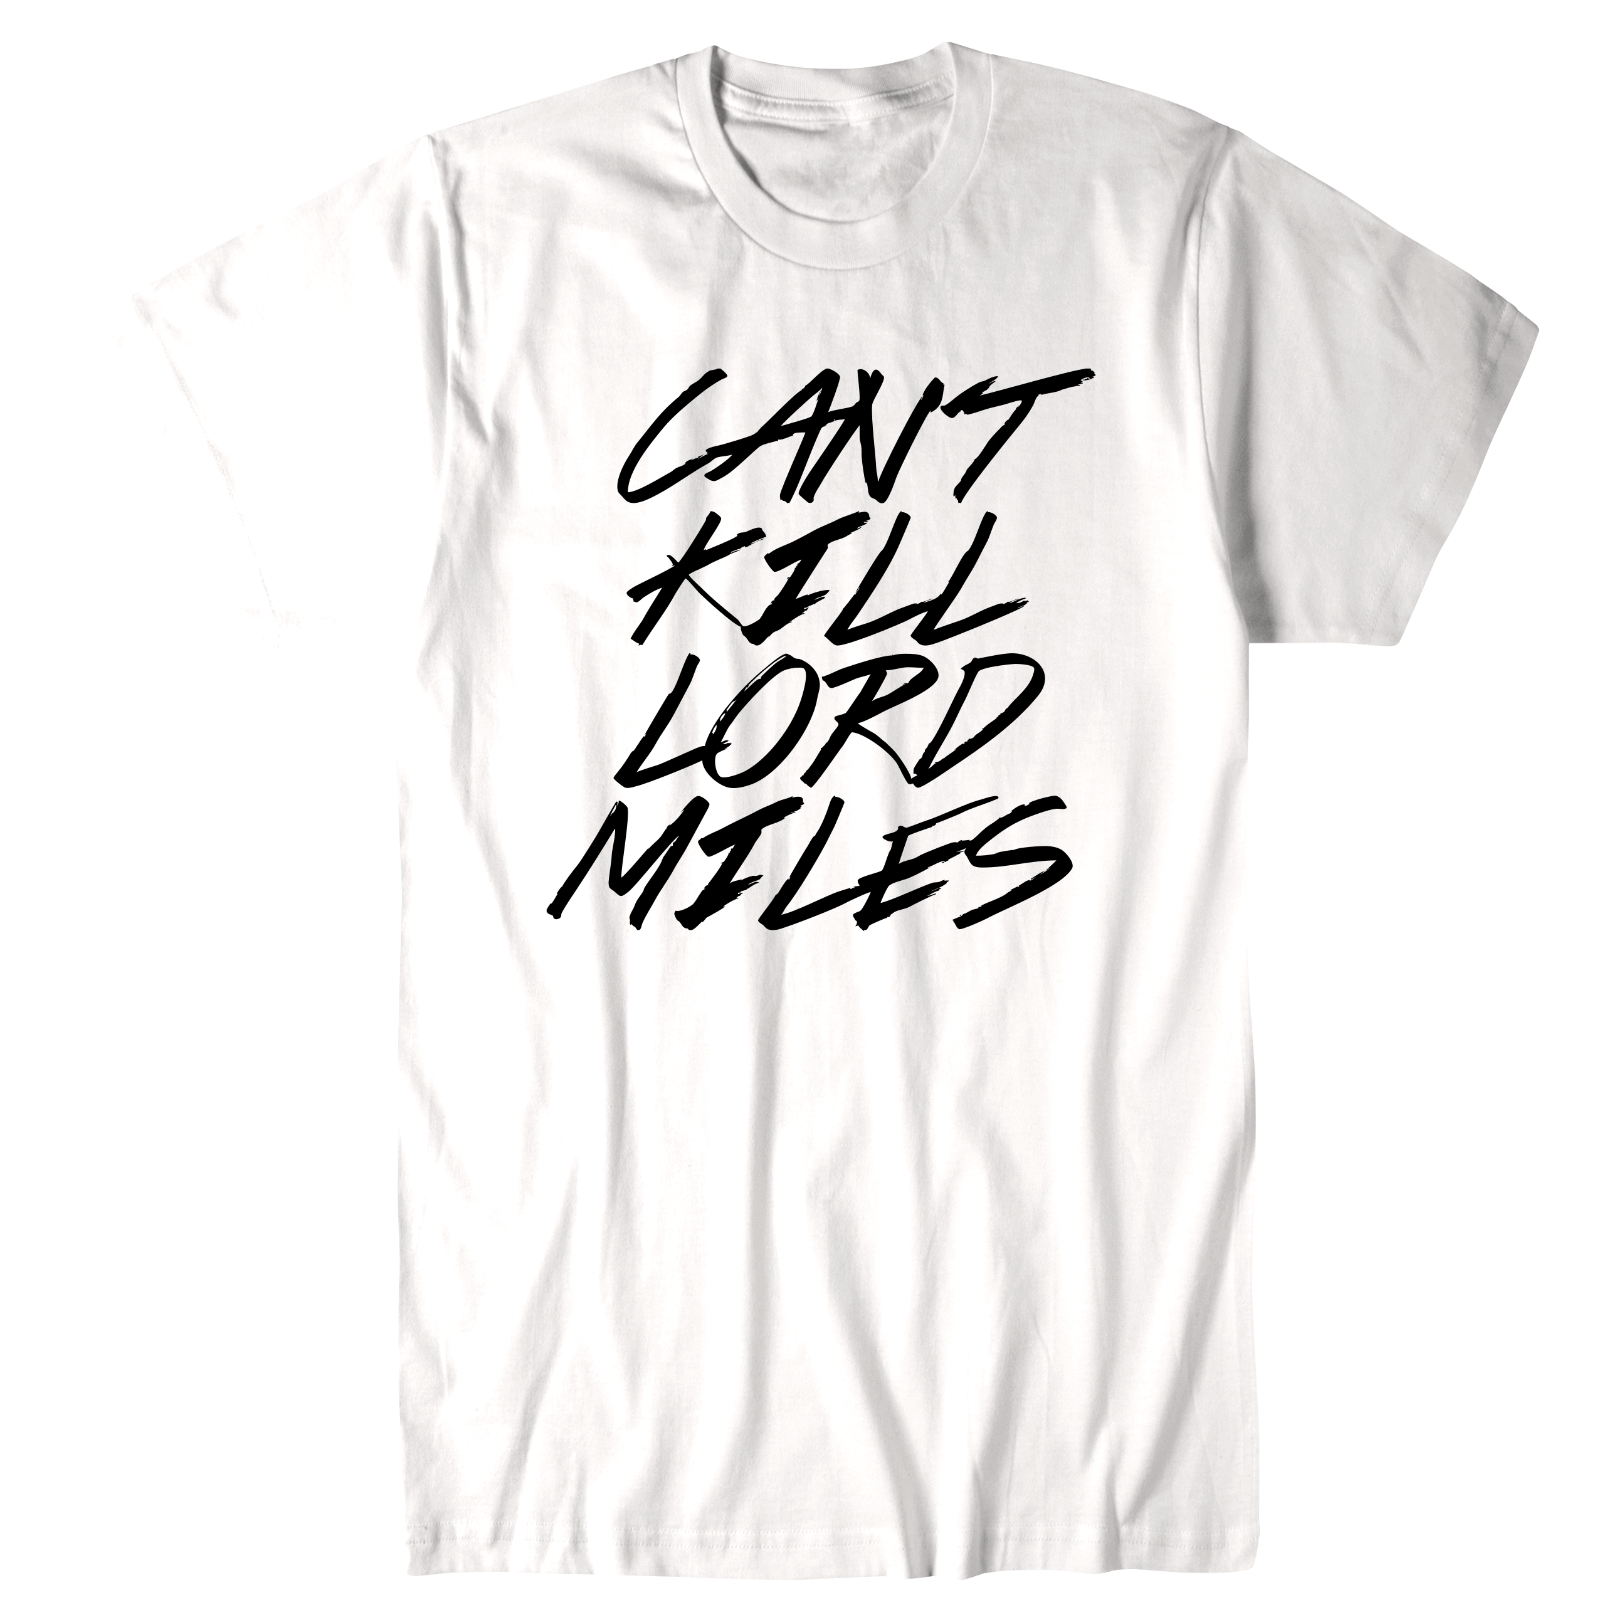 Cant Kill Lord Miles (White) Racerback-4